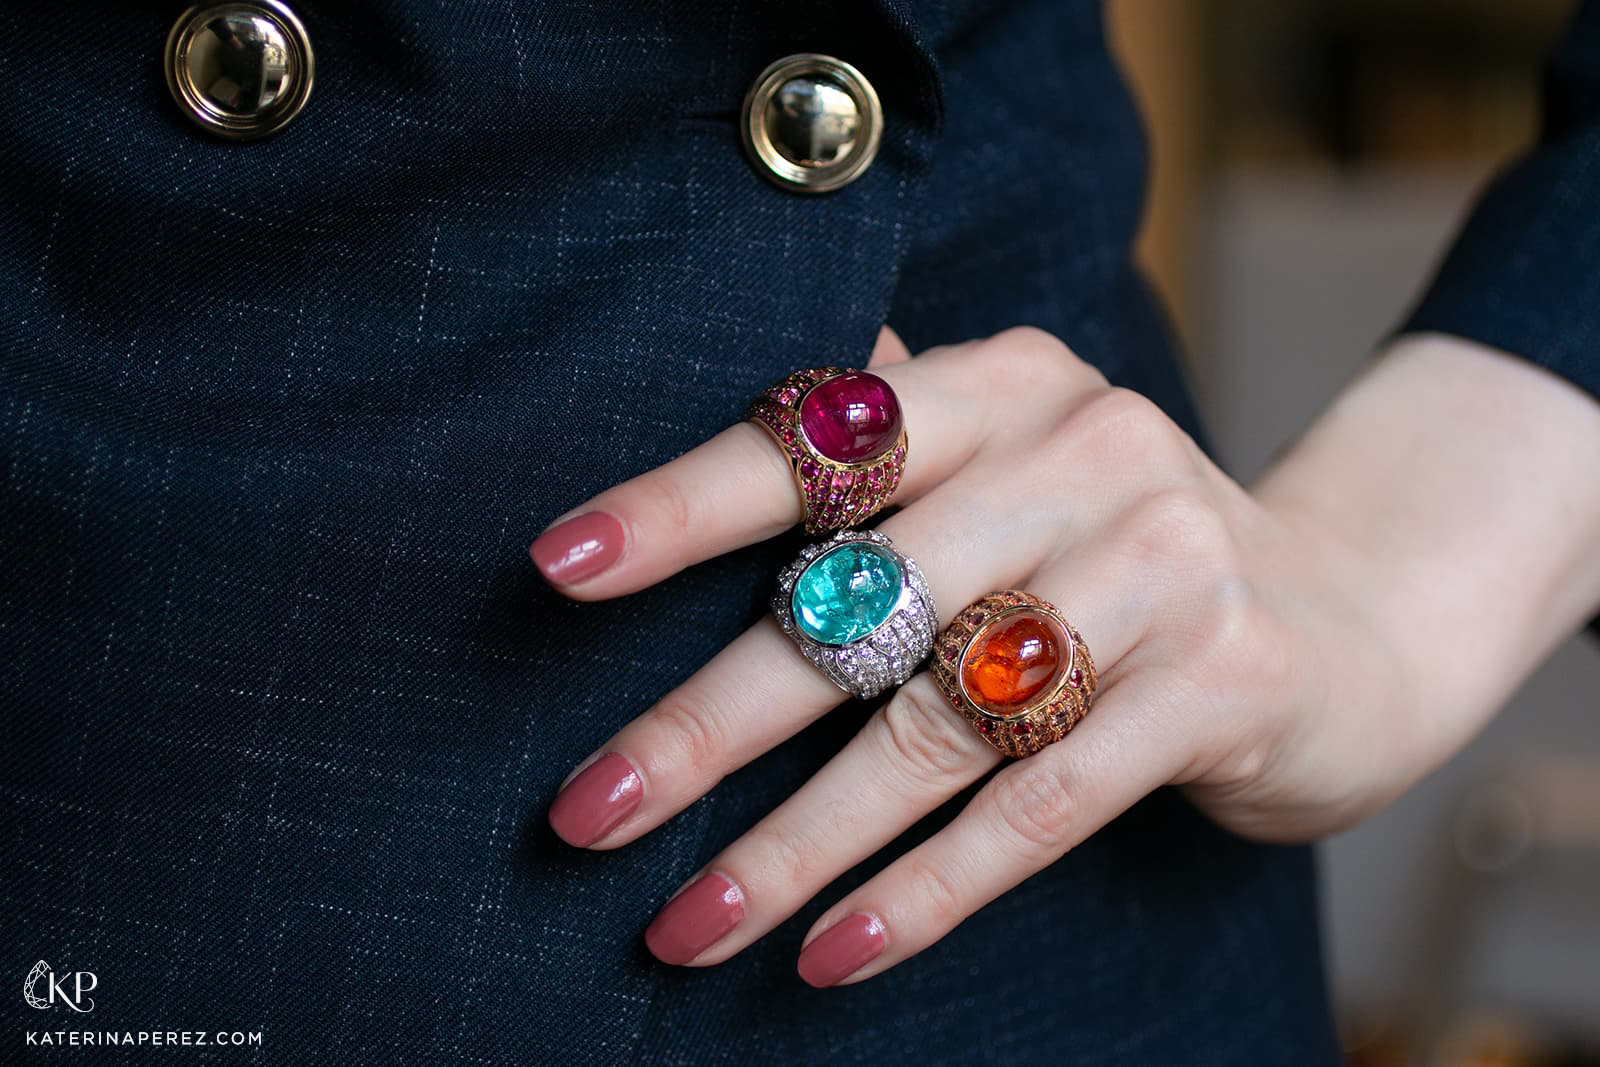 A Stunning New Gemstone: Introducing Aquadité - Jewelry Connoisseur